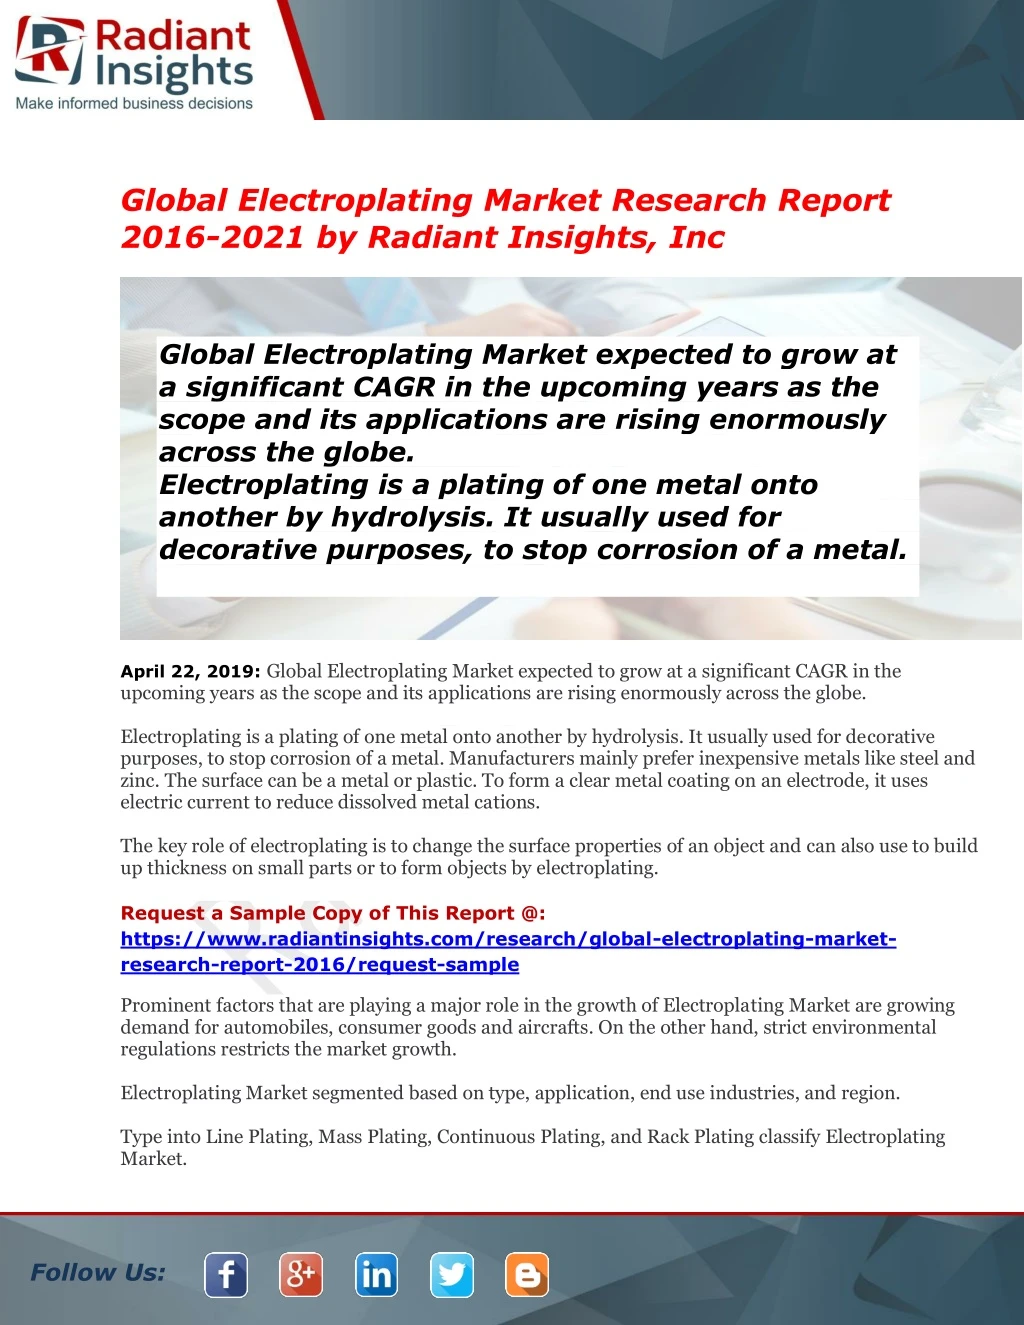 global electroplating market research report 2016